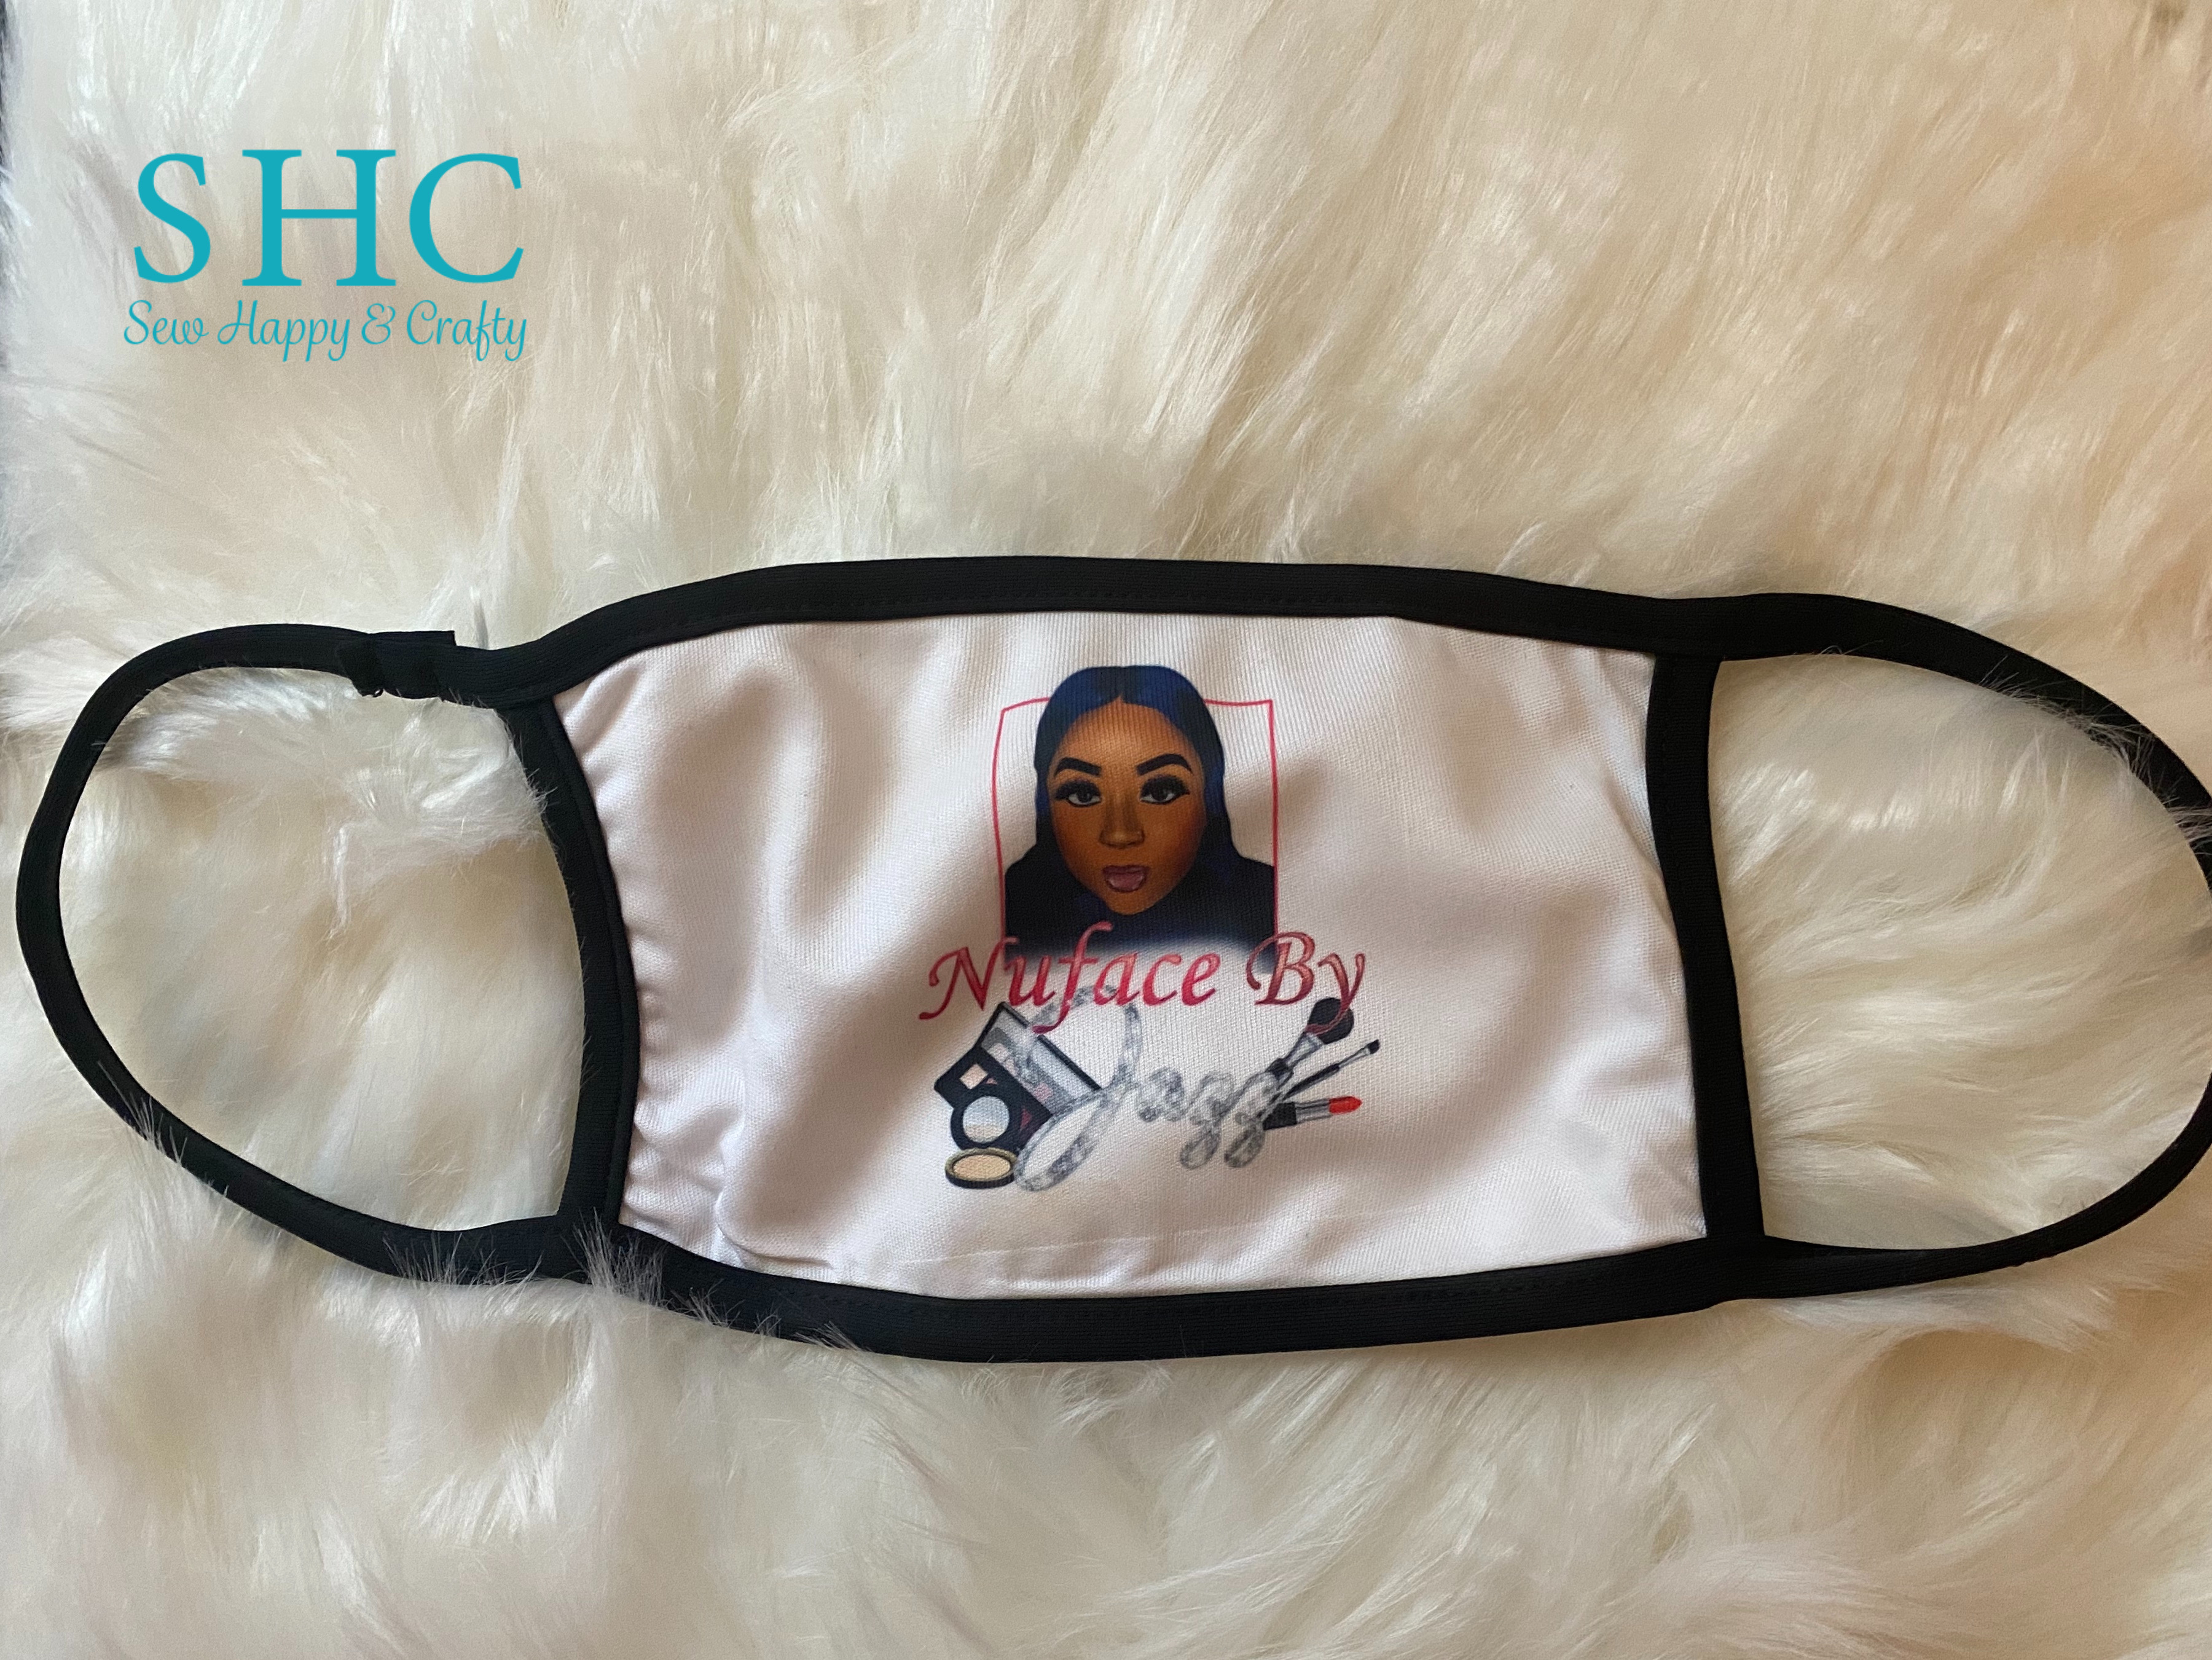 Branded Face Mask  made with sublimation printing